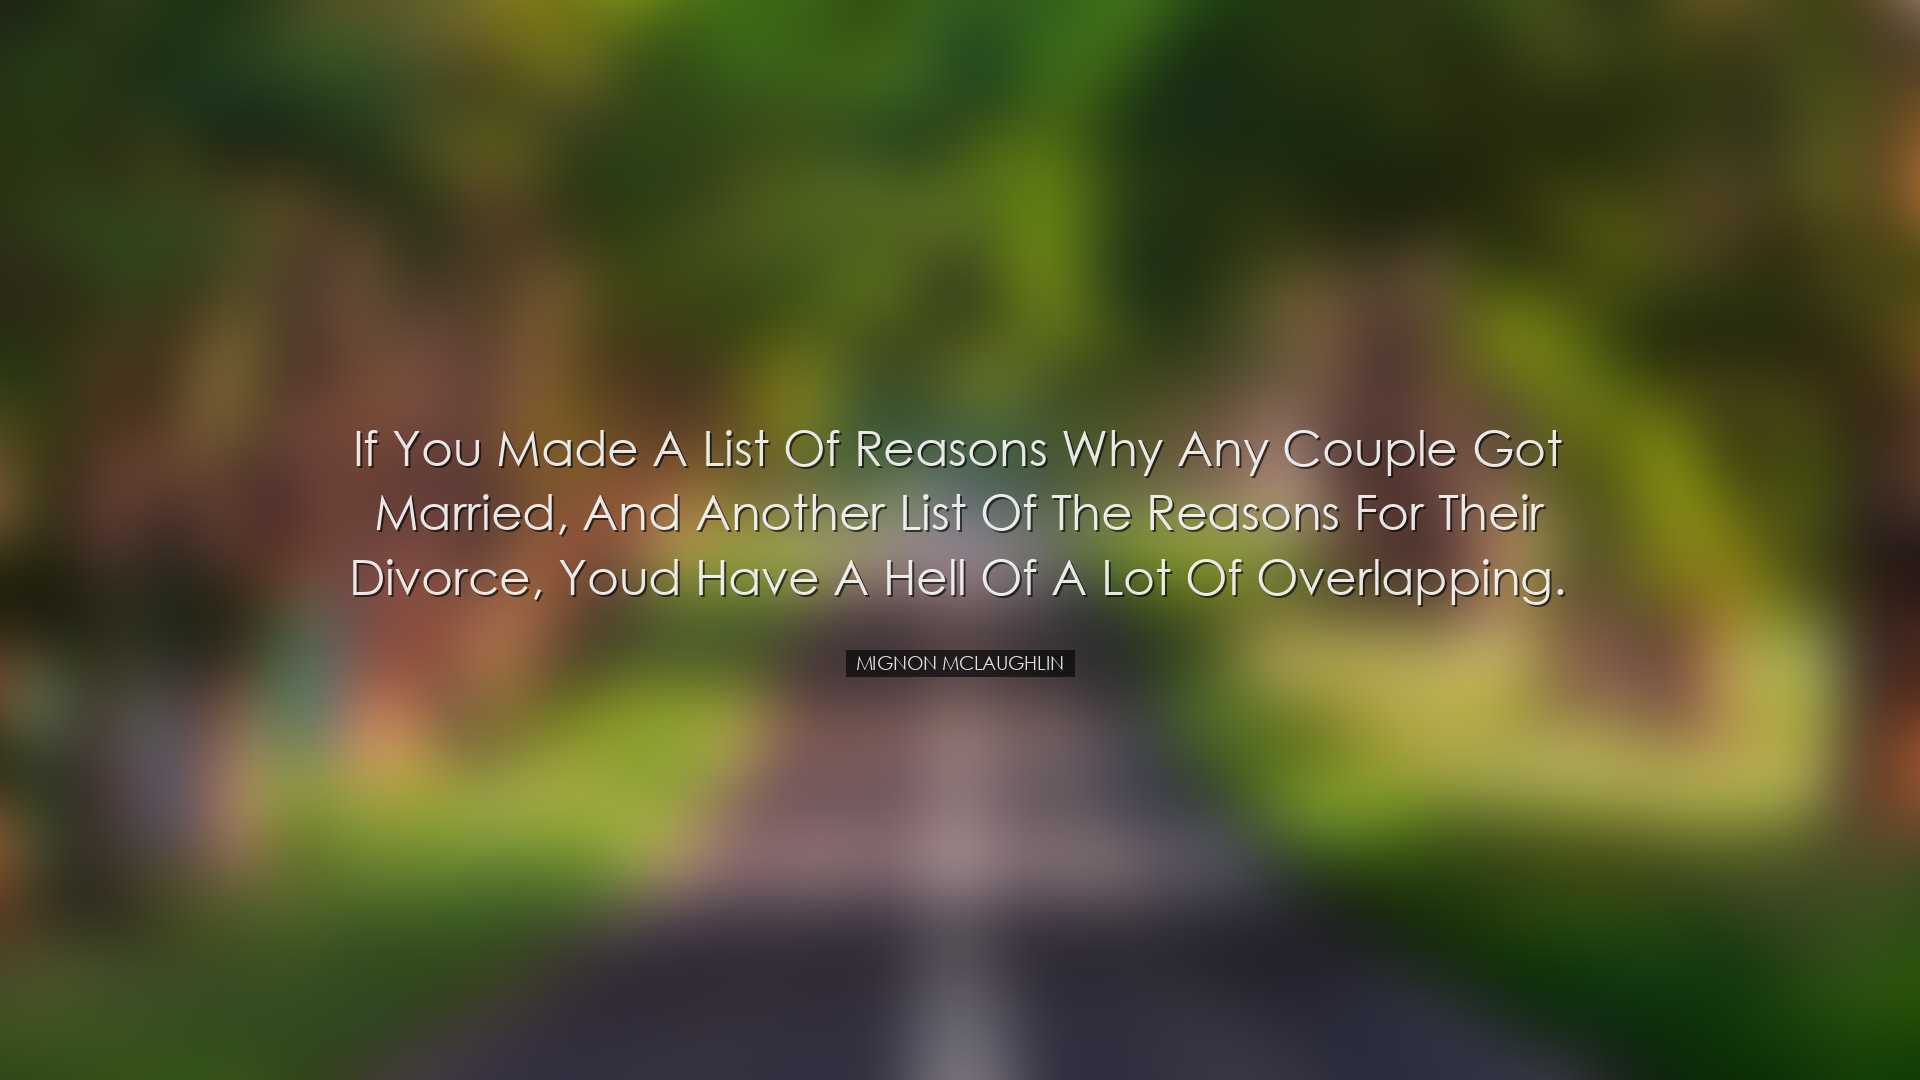 If you made a list of reasons why any couple got married, and anot